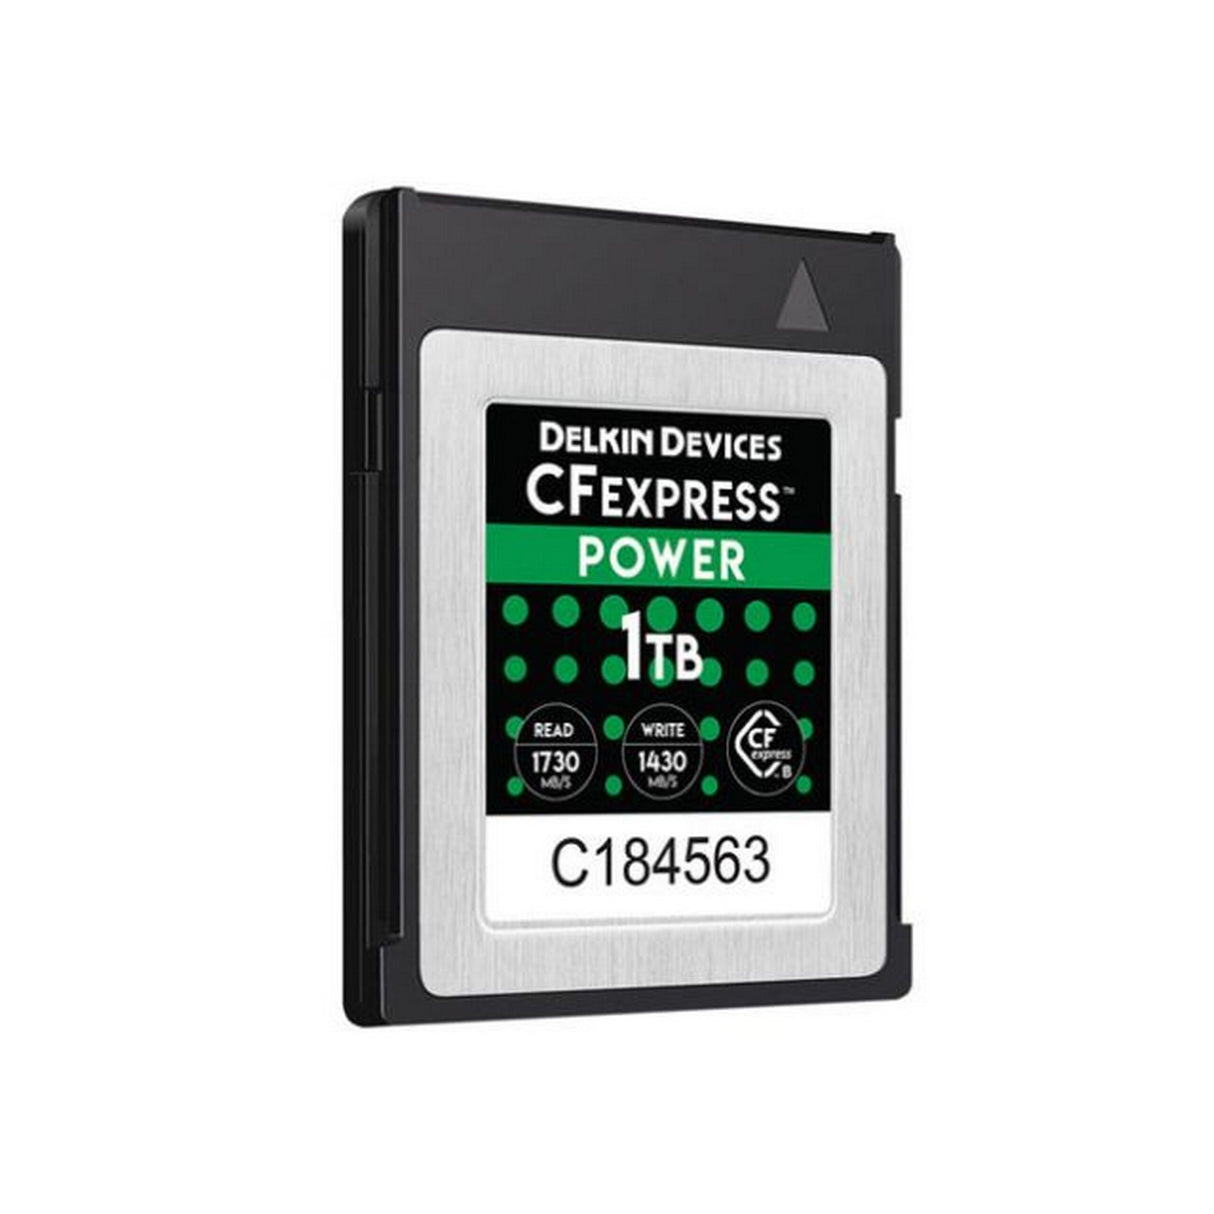 Delkin Devices POWER CFexpress Memory Card, 1TB